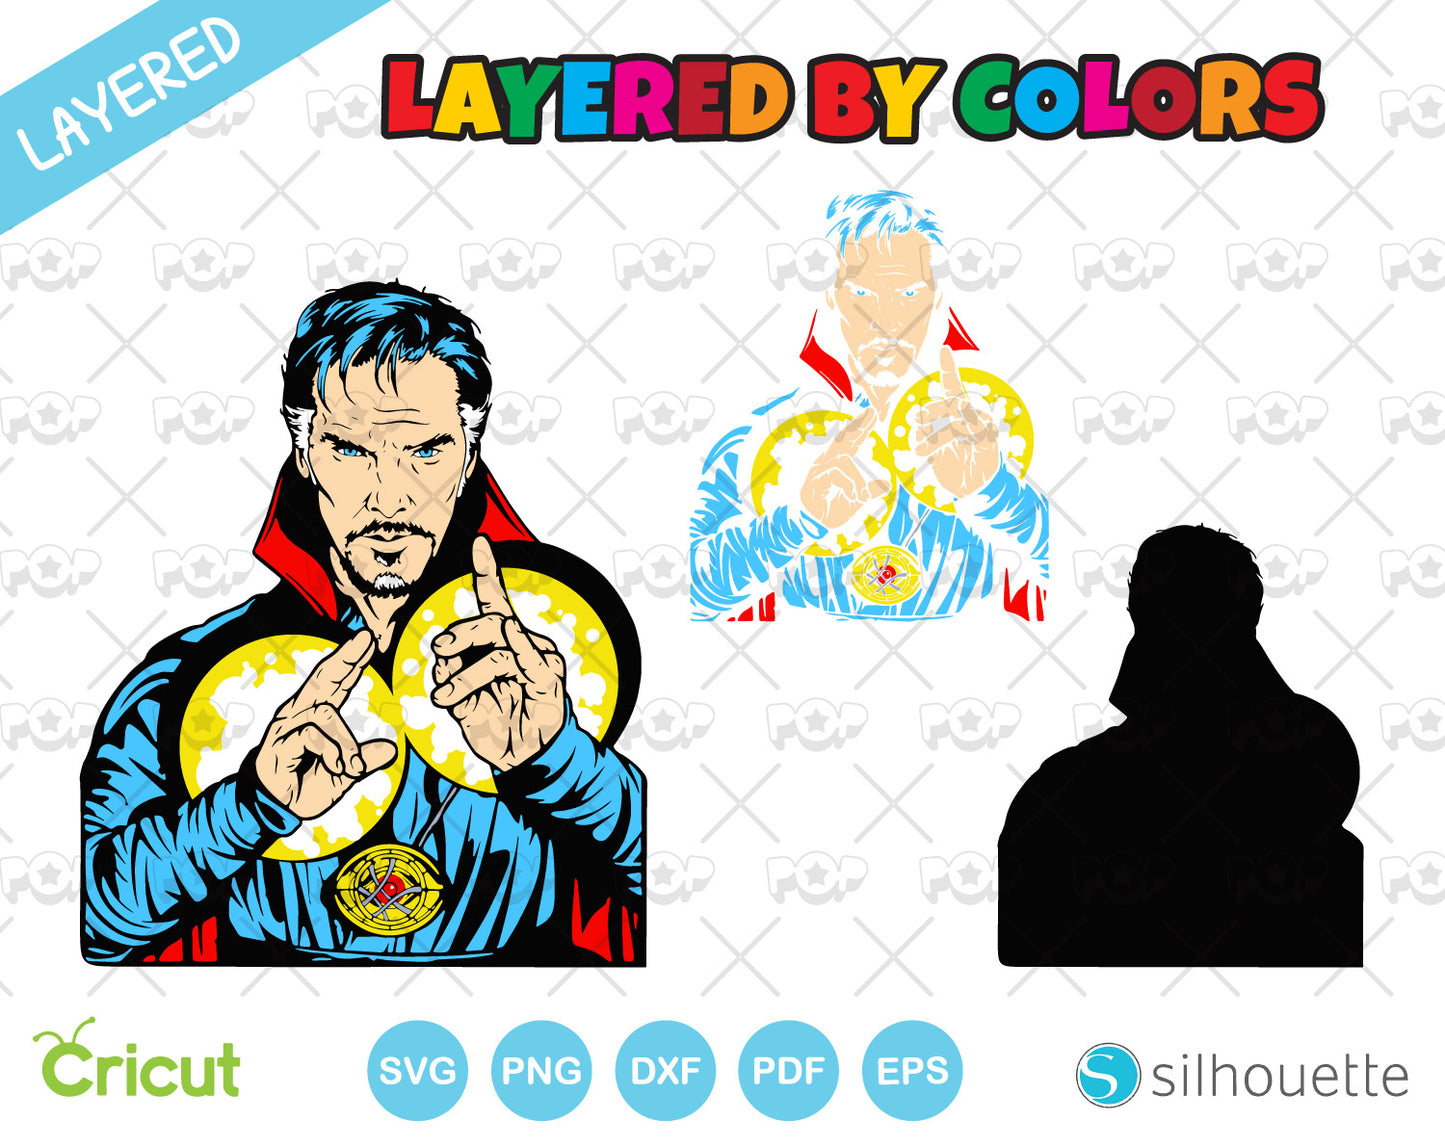 Doctor Strange in the Multiverse of Madness – clipart set, Marvel SVG cut files for Cricut / Silhouette, PNG, DXF, instant download